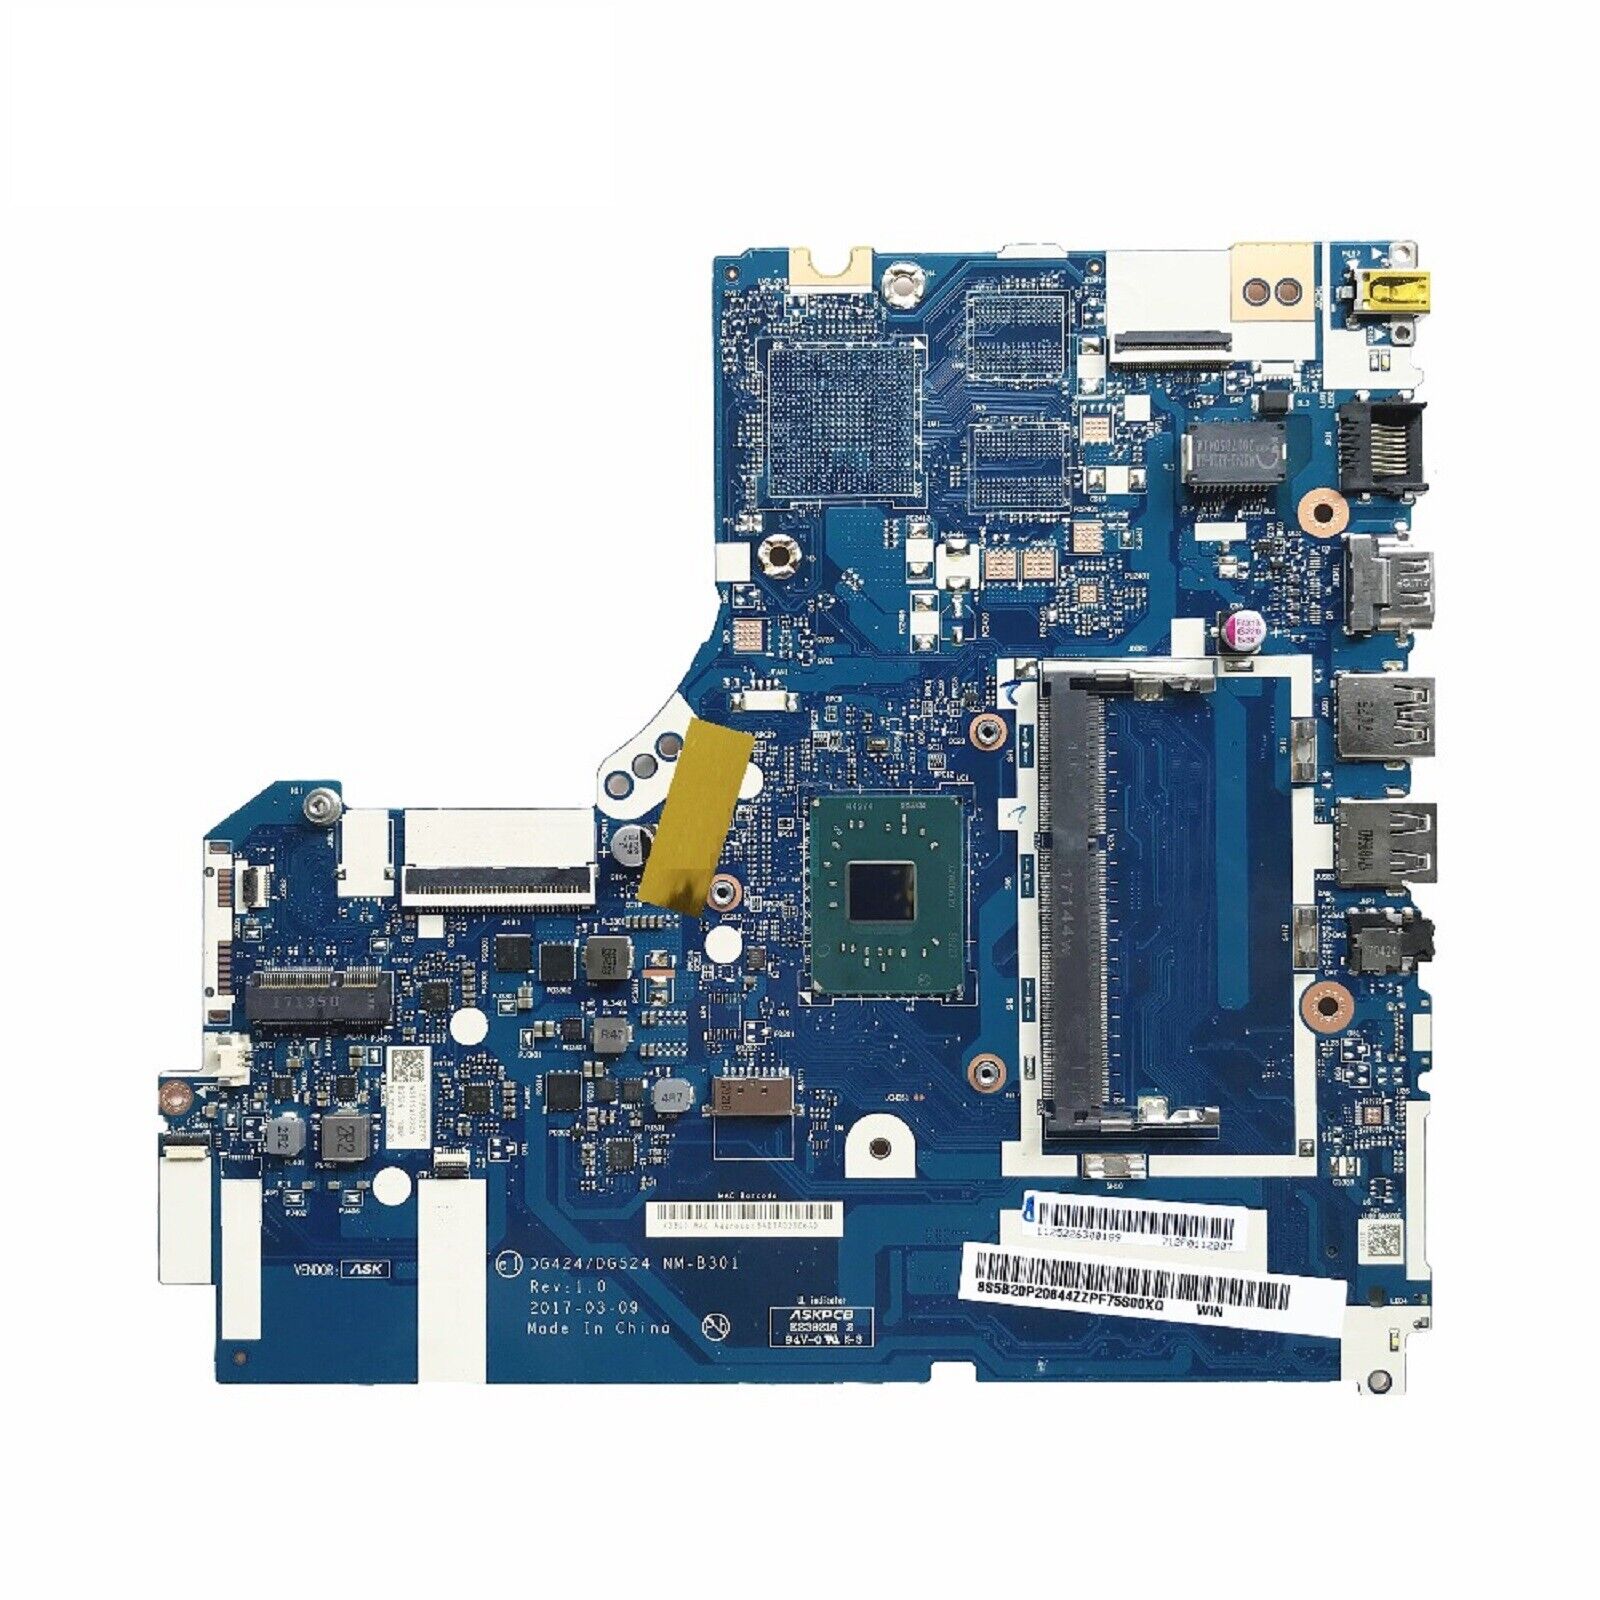 For Lenovo Ideapad 320-15IAP Motherboard with N3350 CPU NM-B301 5B20P20644 Test